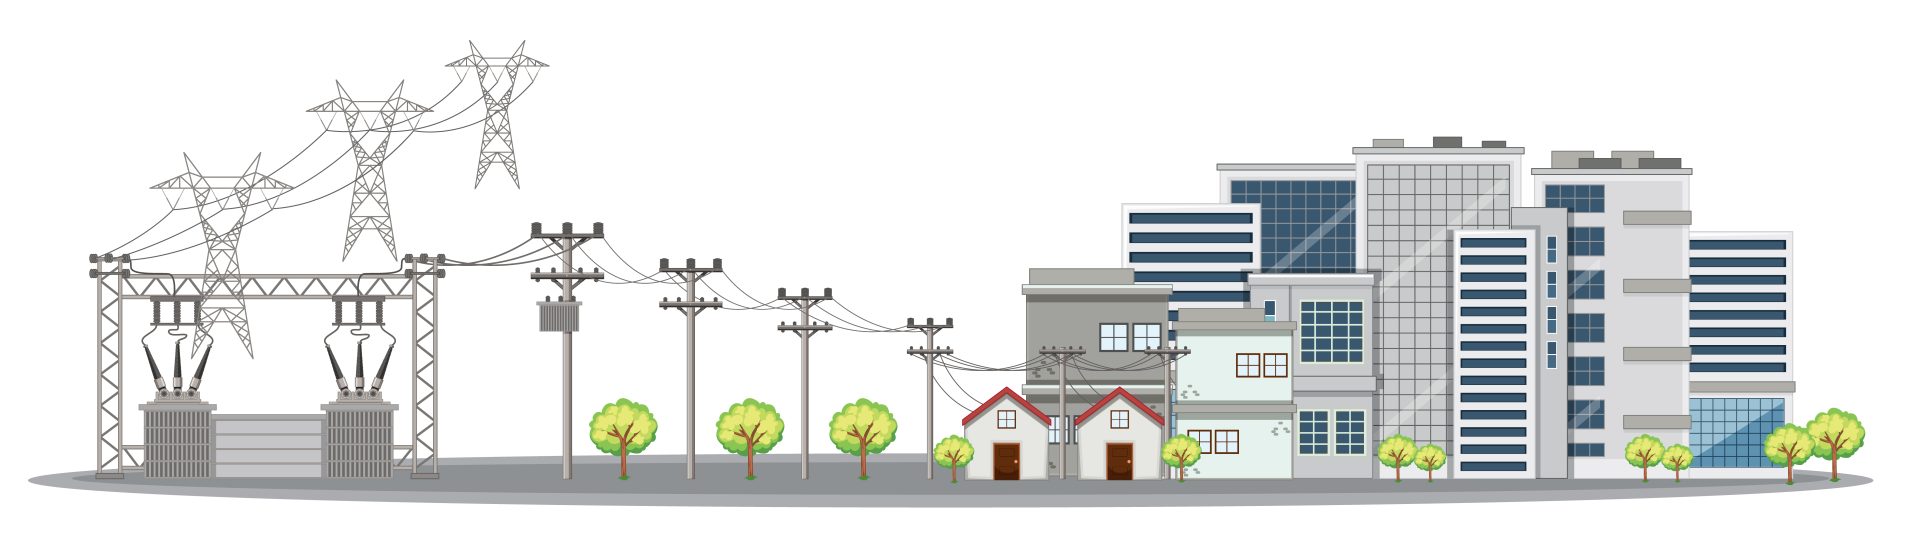 Electricity poles and buildings in city